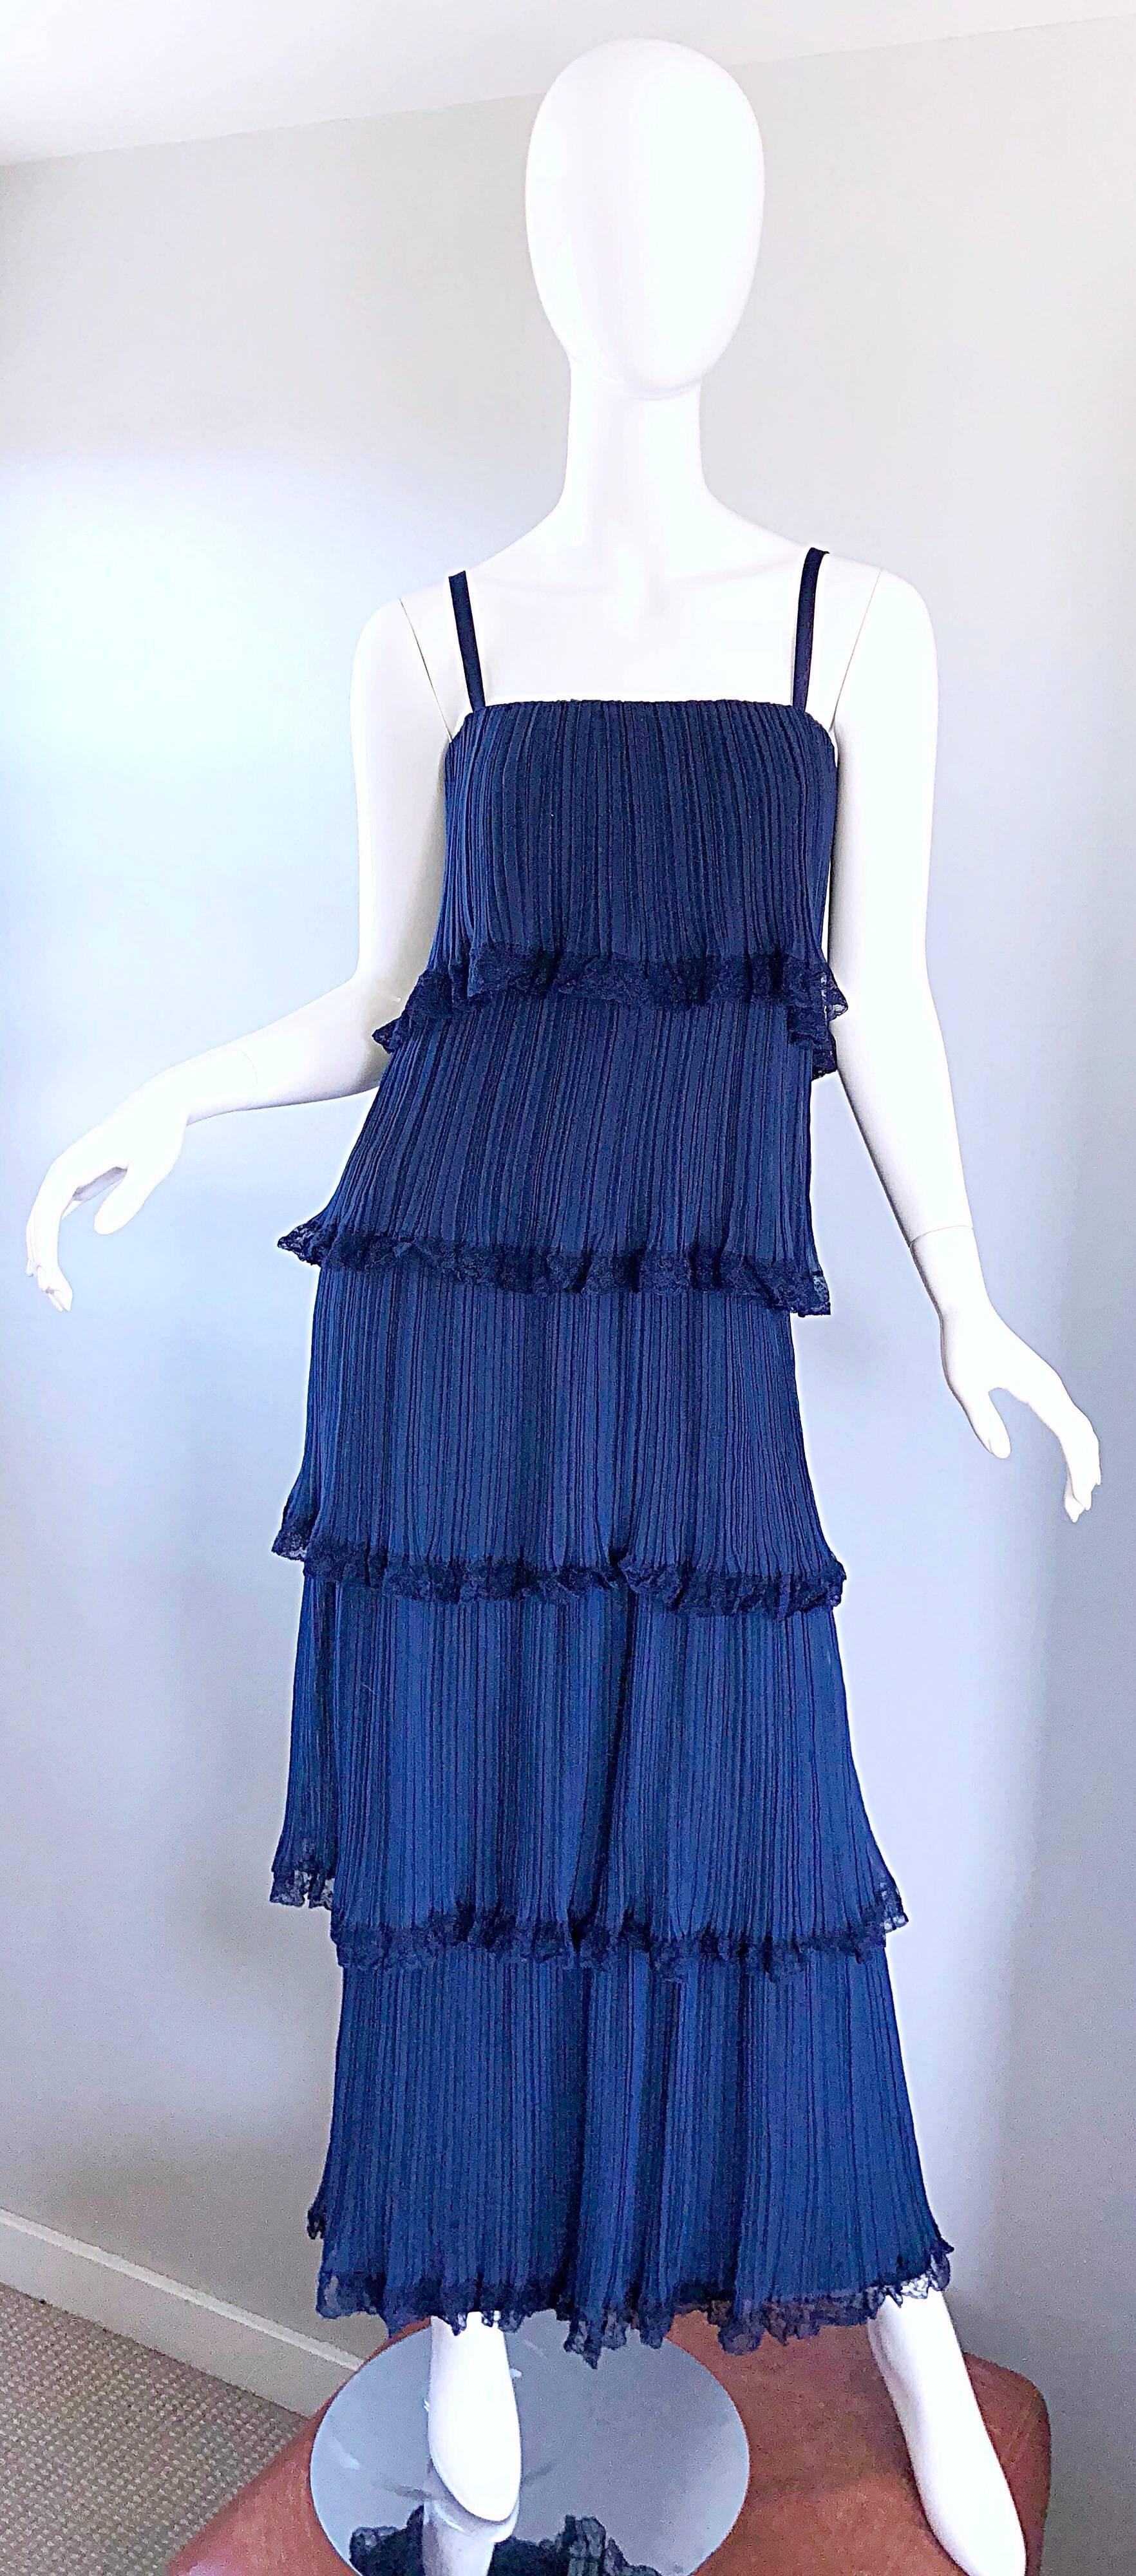 Chic late 1960s BOB BUGNARD COUTURE navy blue silk chiffon accordian pleated tiered full length evening gown / maxi dress! Features intricate accordian pleated chiffon tiers. Navy blue lace trim. Full metal zipper up the back with hook-and-eye